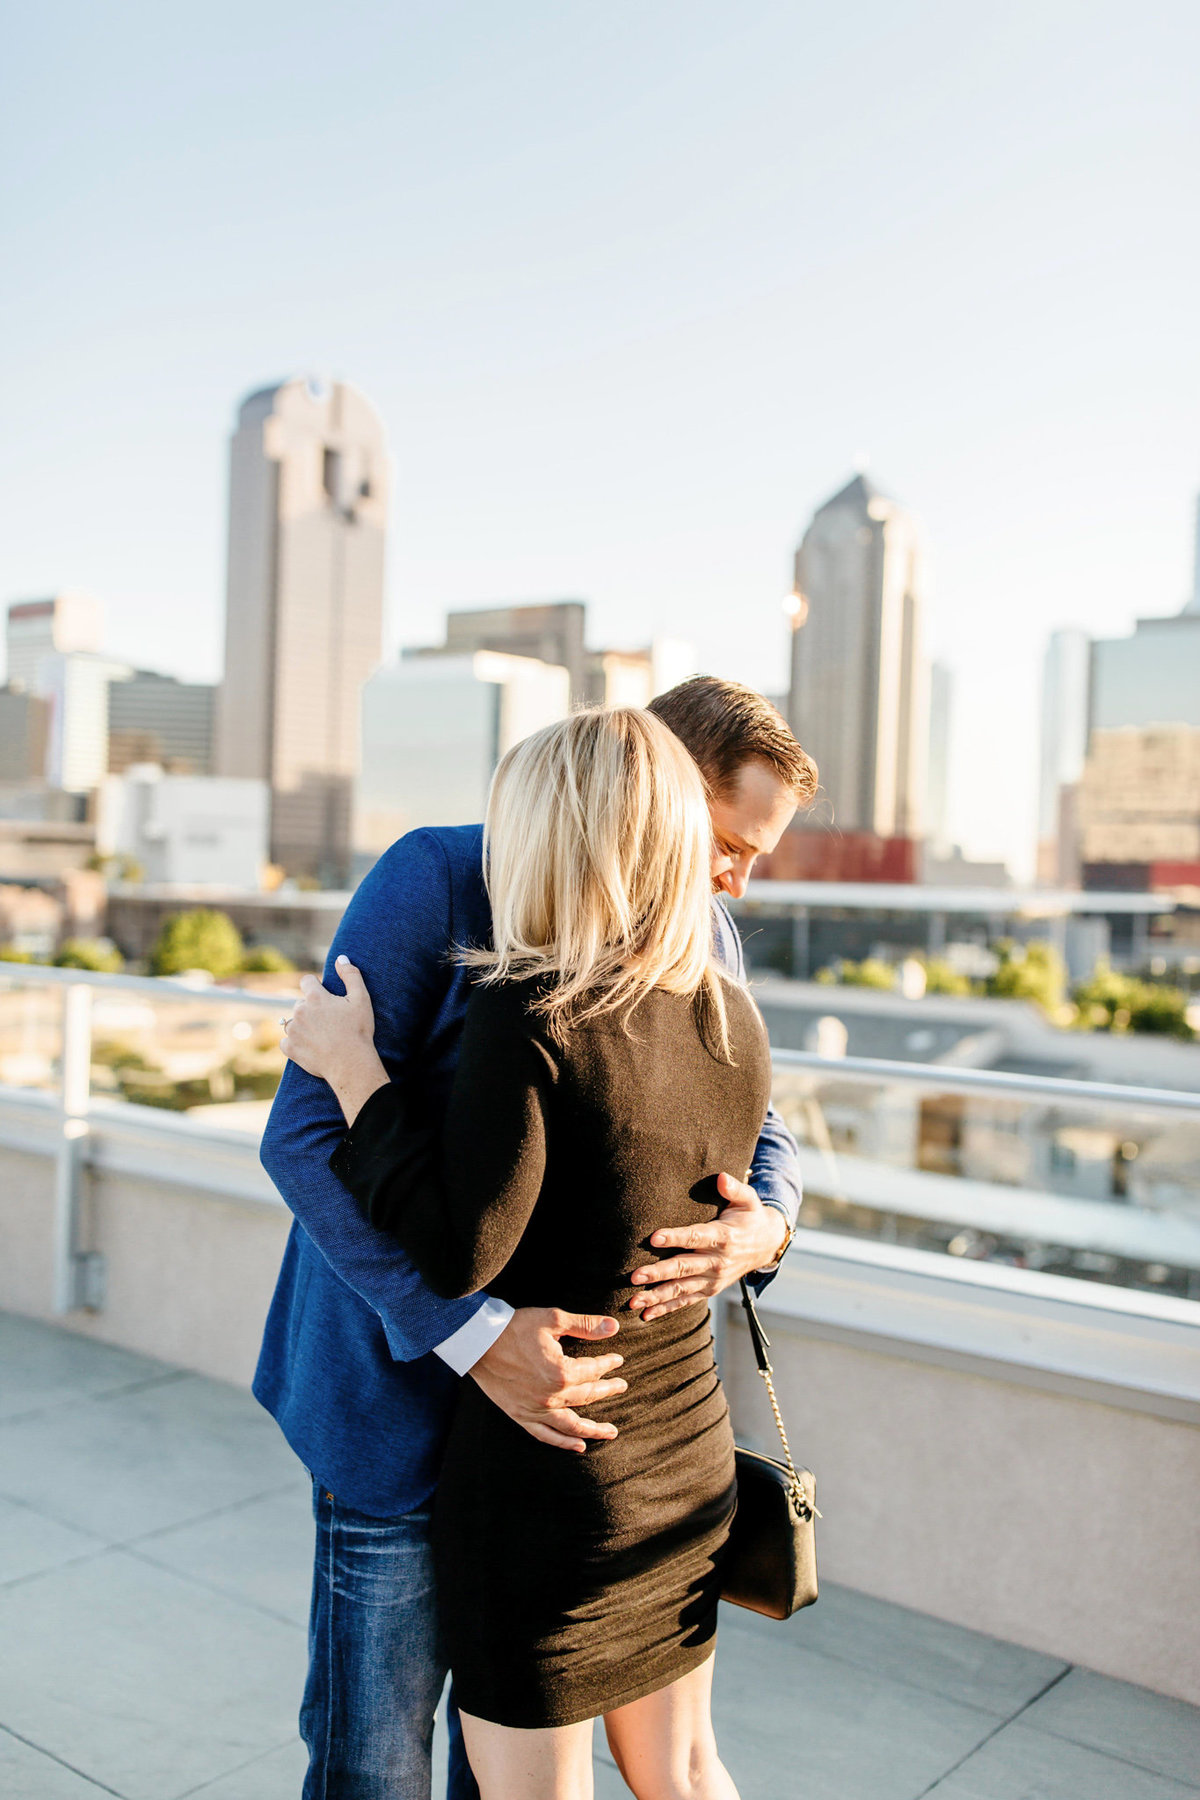 Eric & Megan - Downtown Dallas Rooftop Proposal & Engagement Session-48